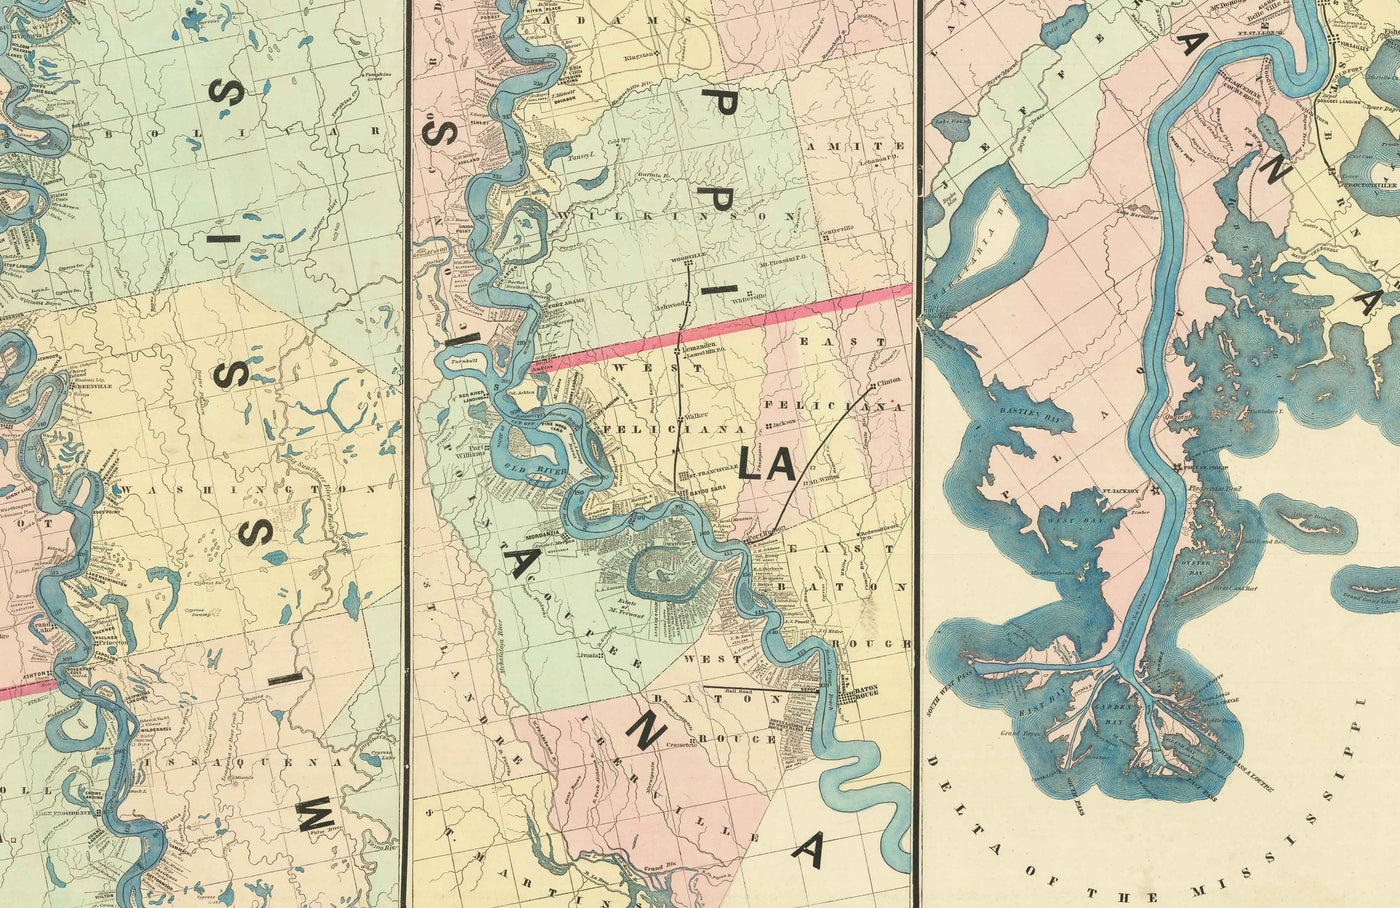 Old Map of the Mississippi River, 1863 by JT Floyd - Strip Map From St Louis to Gulf of Mexico